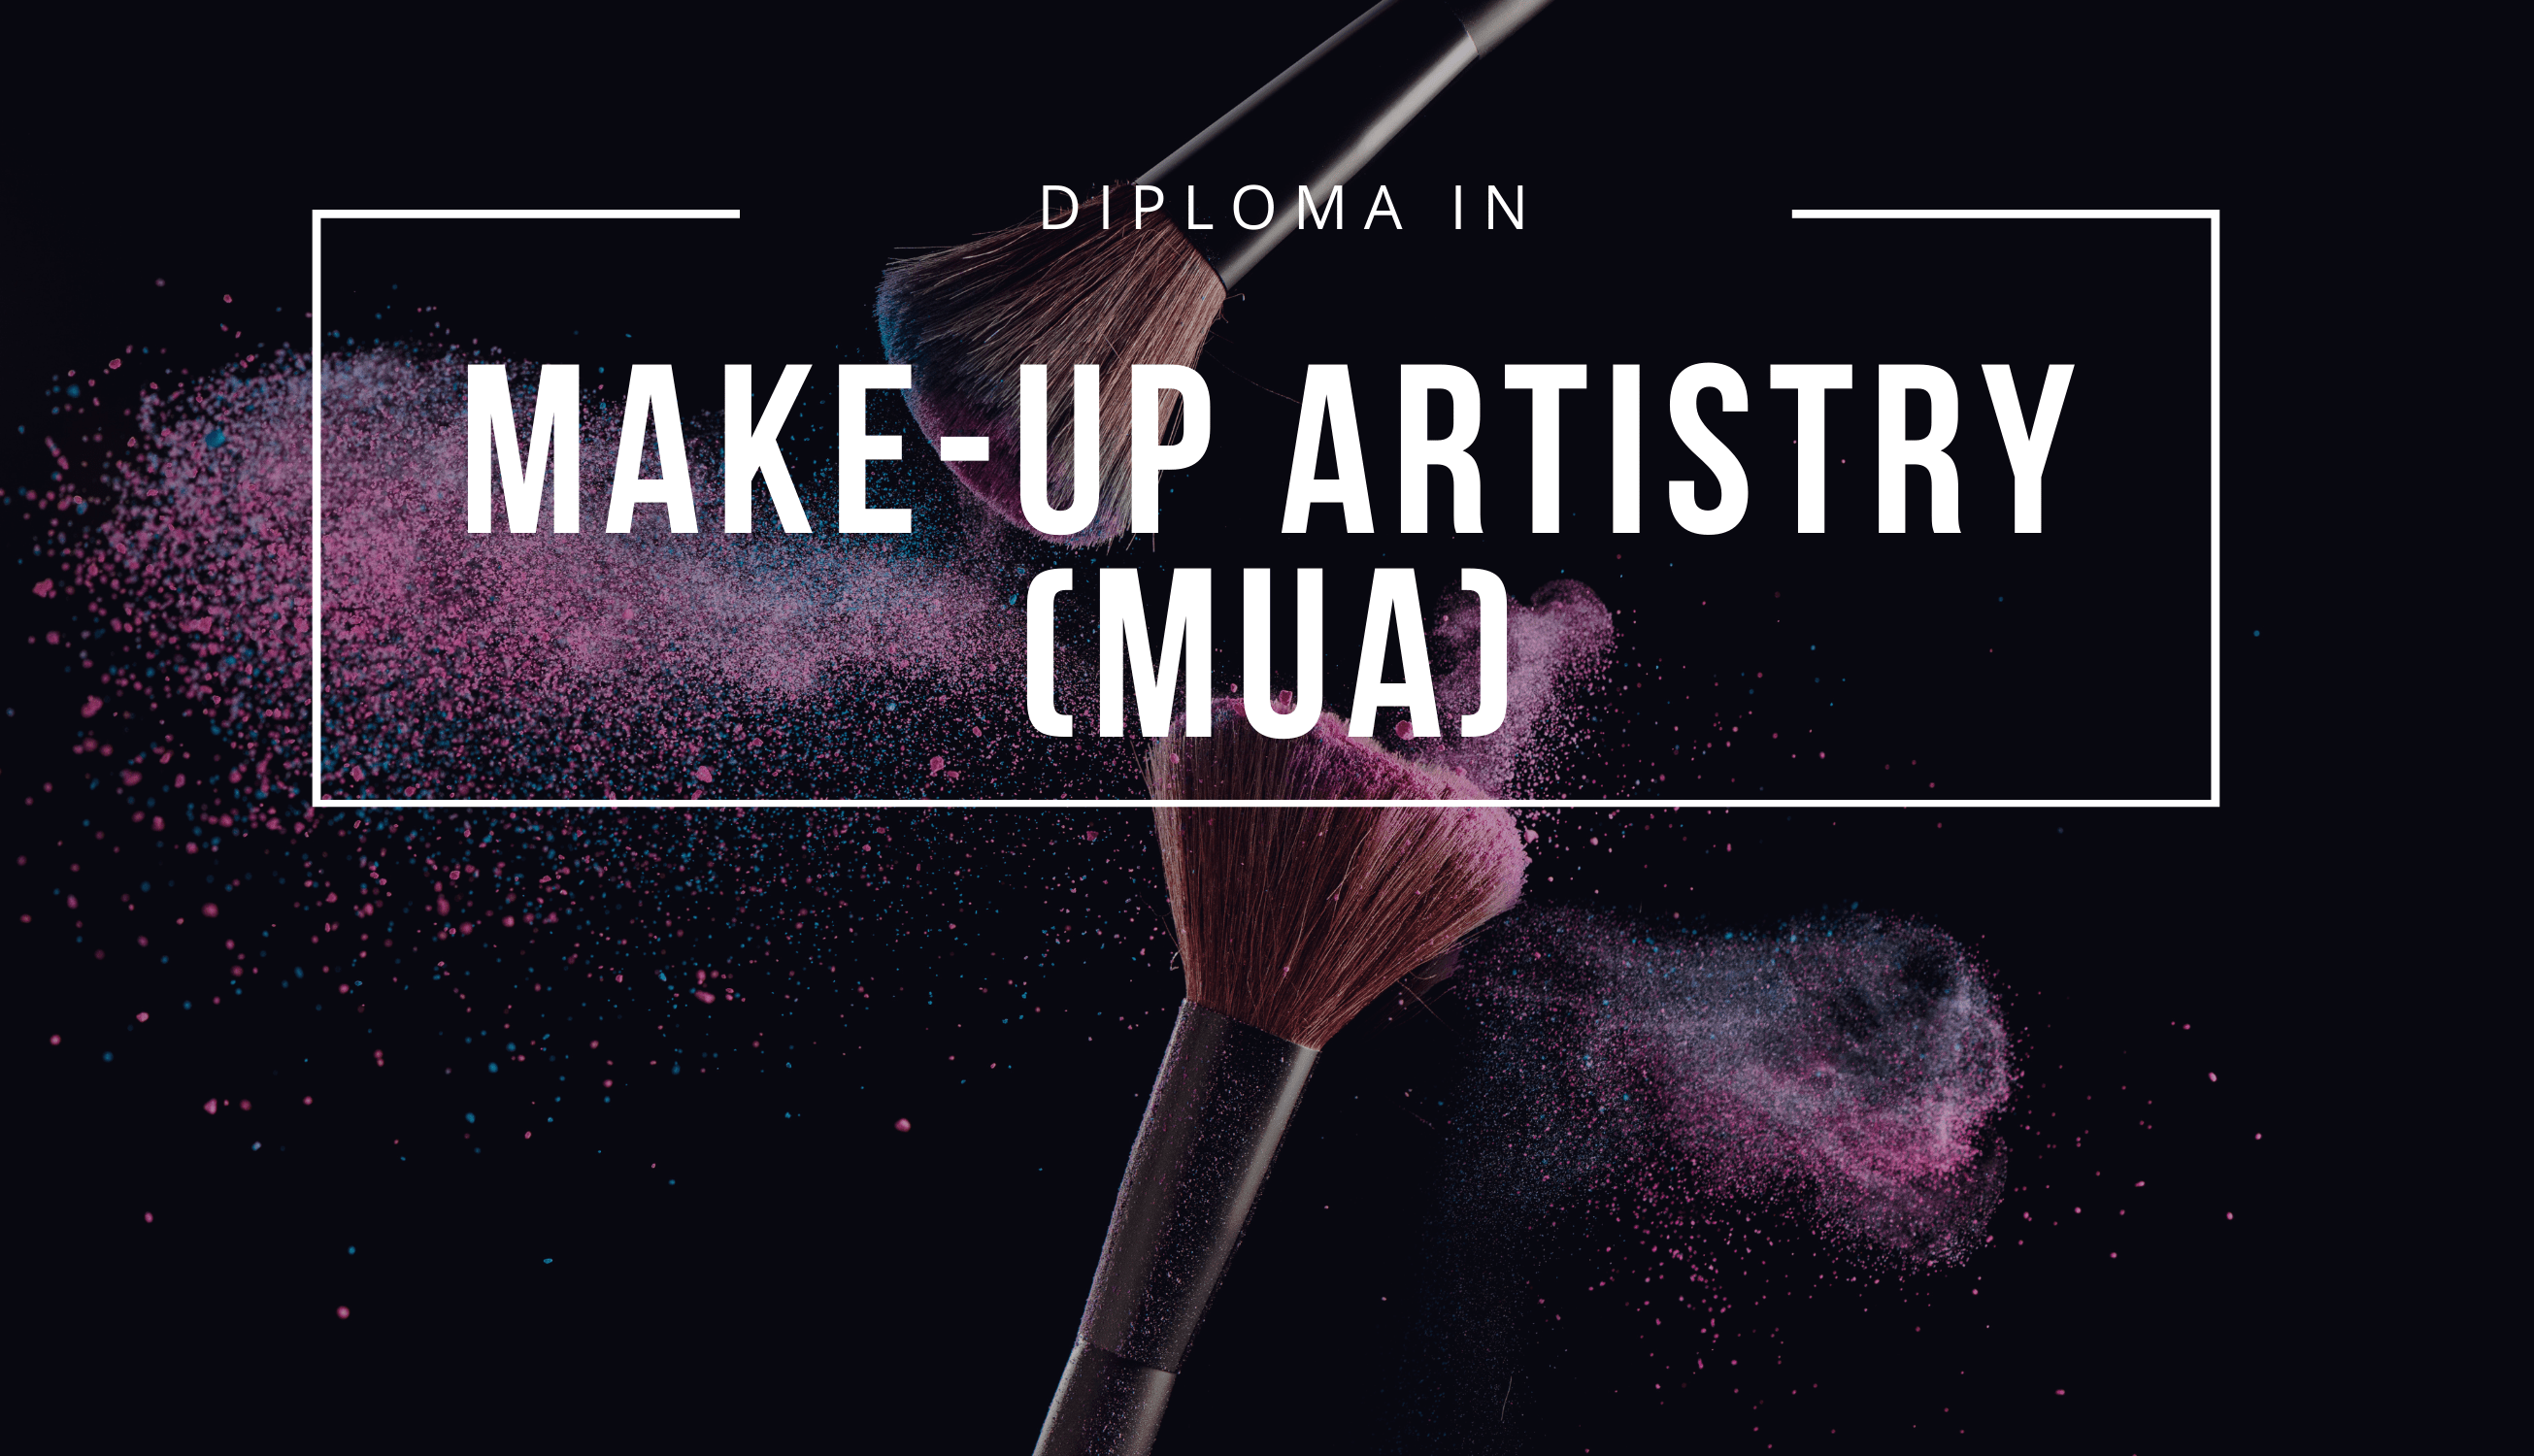 Diploma in Make-Up Artistry (MUA) - London College of Arts